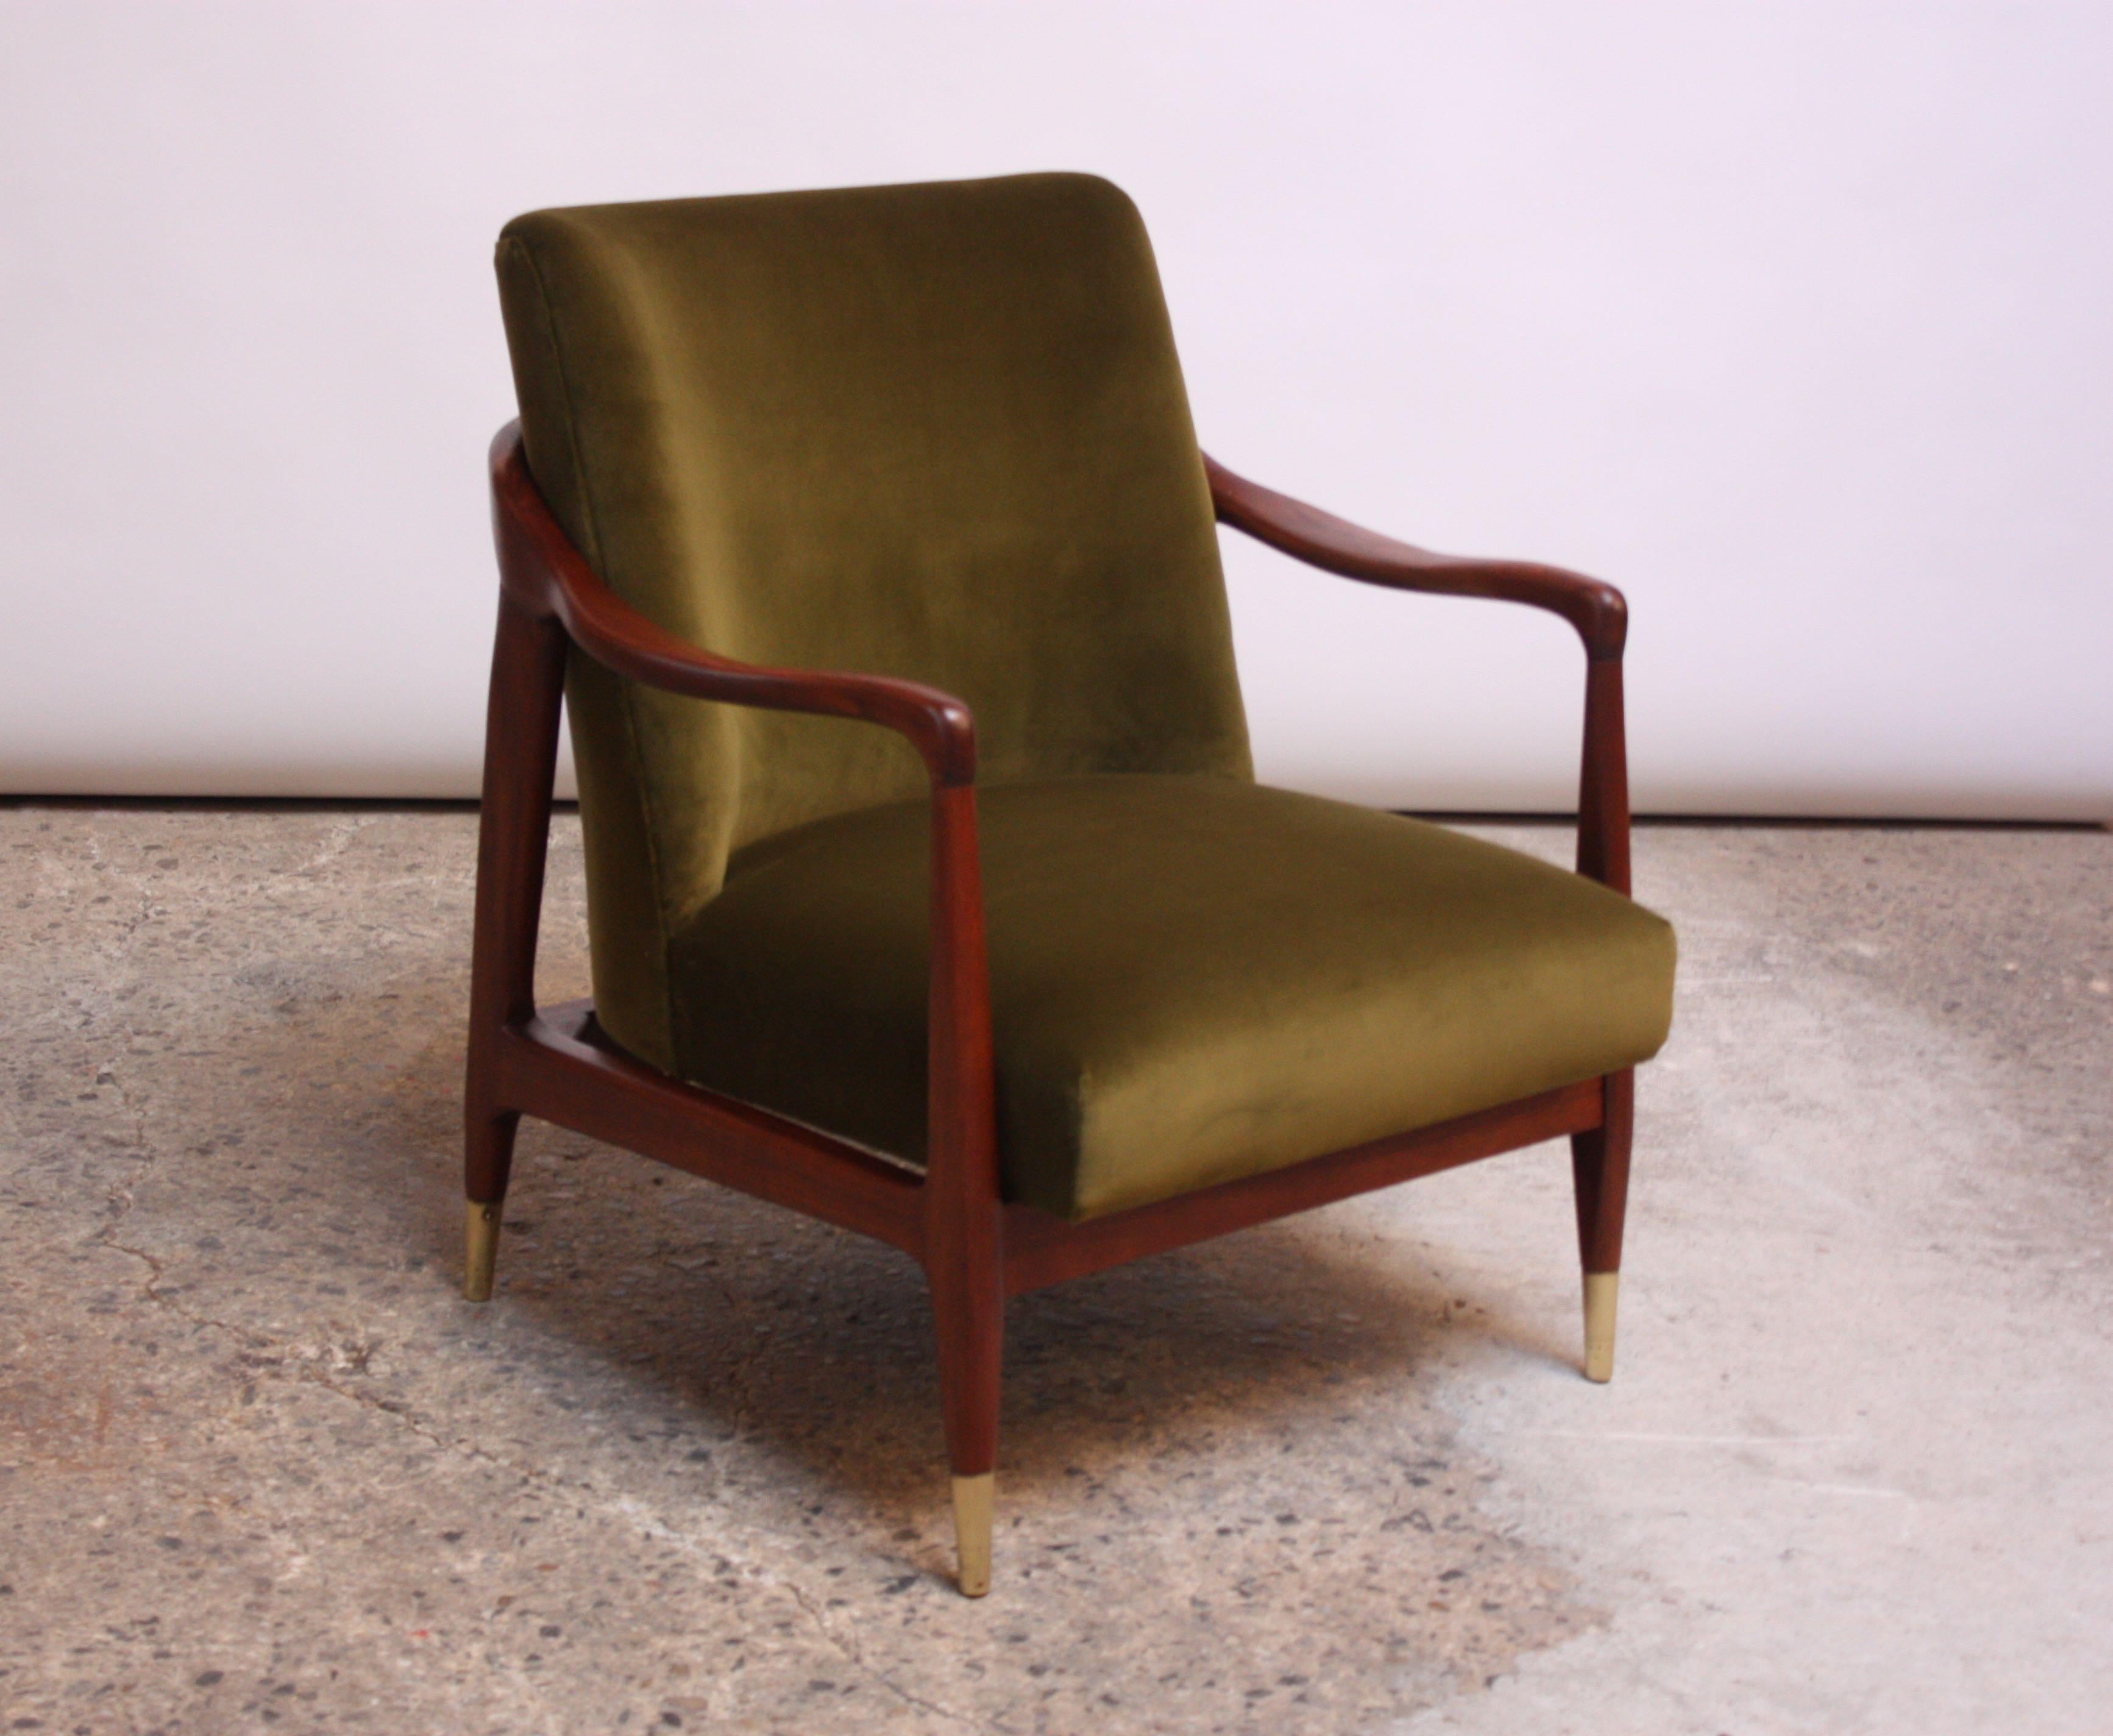 Exquisite, diminutive 1950s Italian lounge chair featuring a sculpted walnut frame and brass sabots. Newly reupholstered in a moss green velvet. Frame has been refinished and sabots have been polished, but minor wear remains to brass, as pictured.